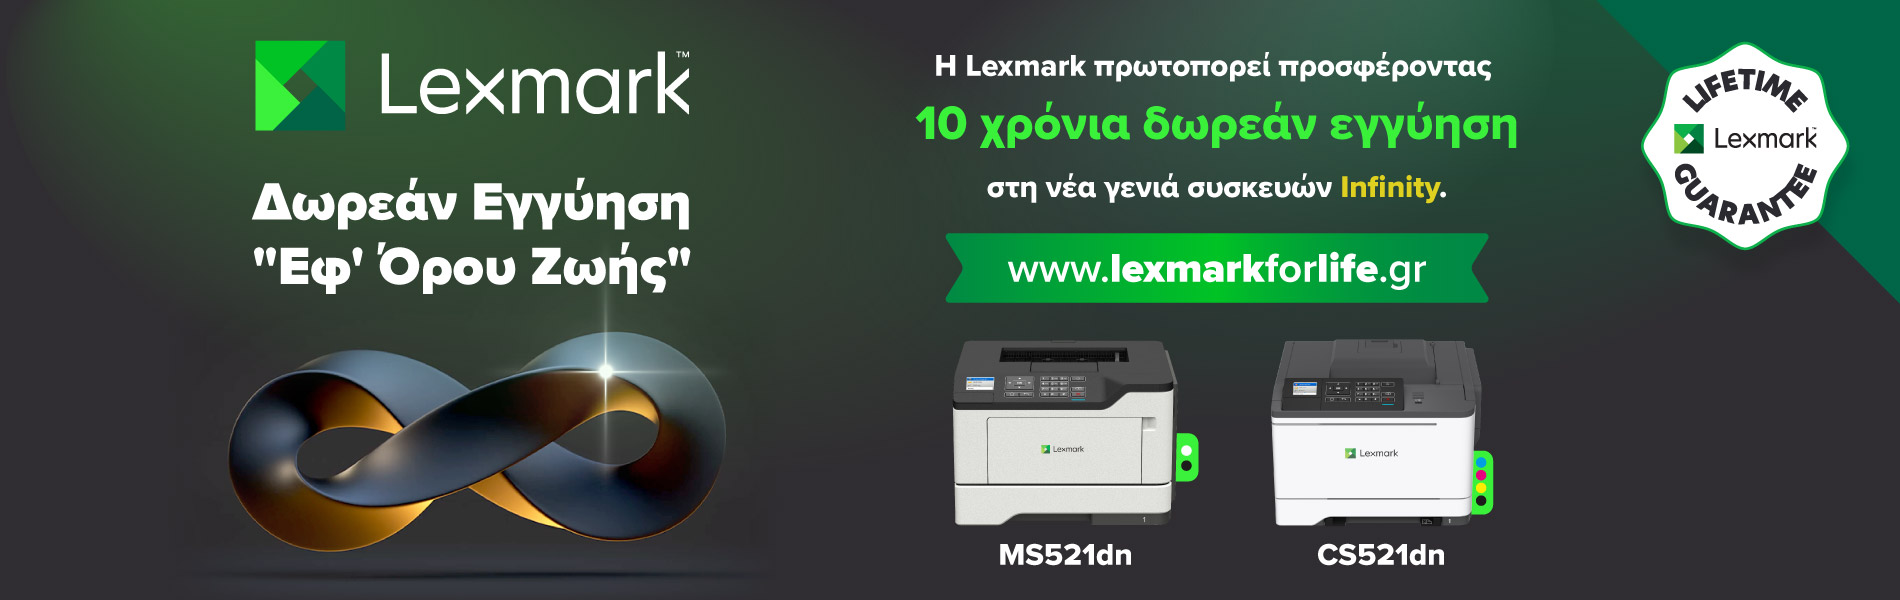 The image shows the Lexmark Infinity program extending warranty on selected Lexmark printers for up to 10 years!